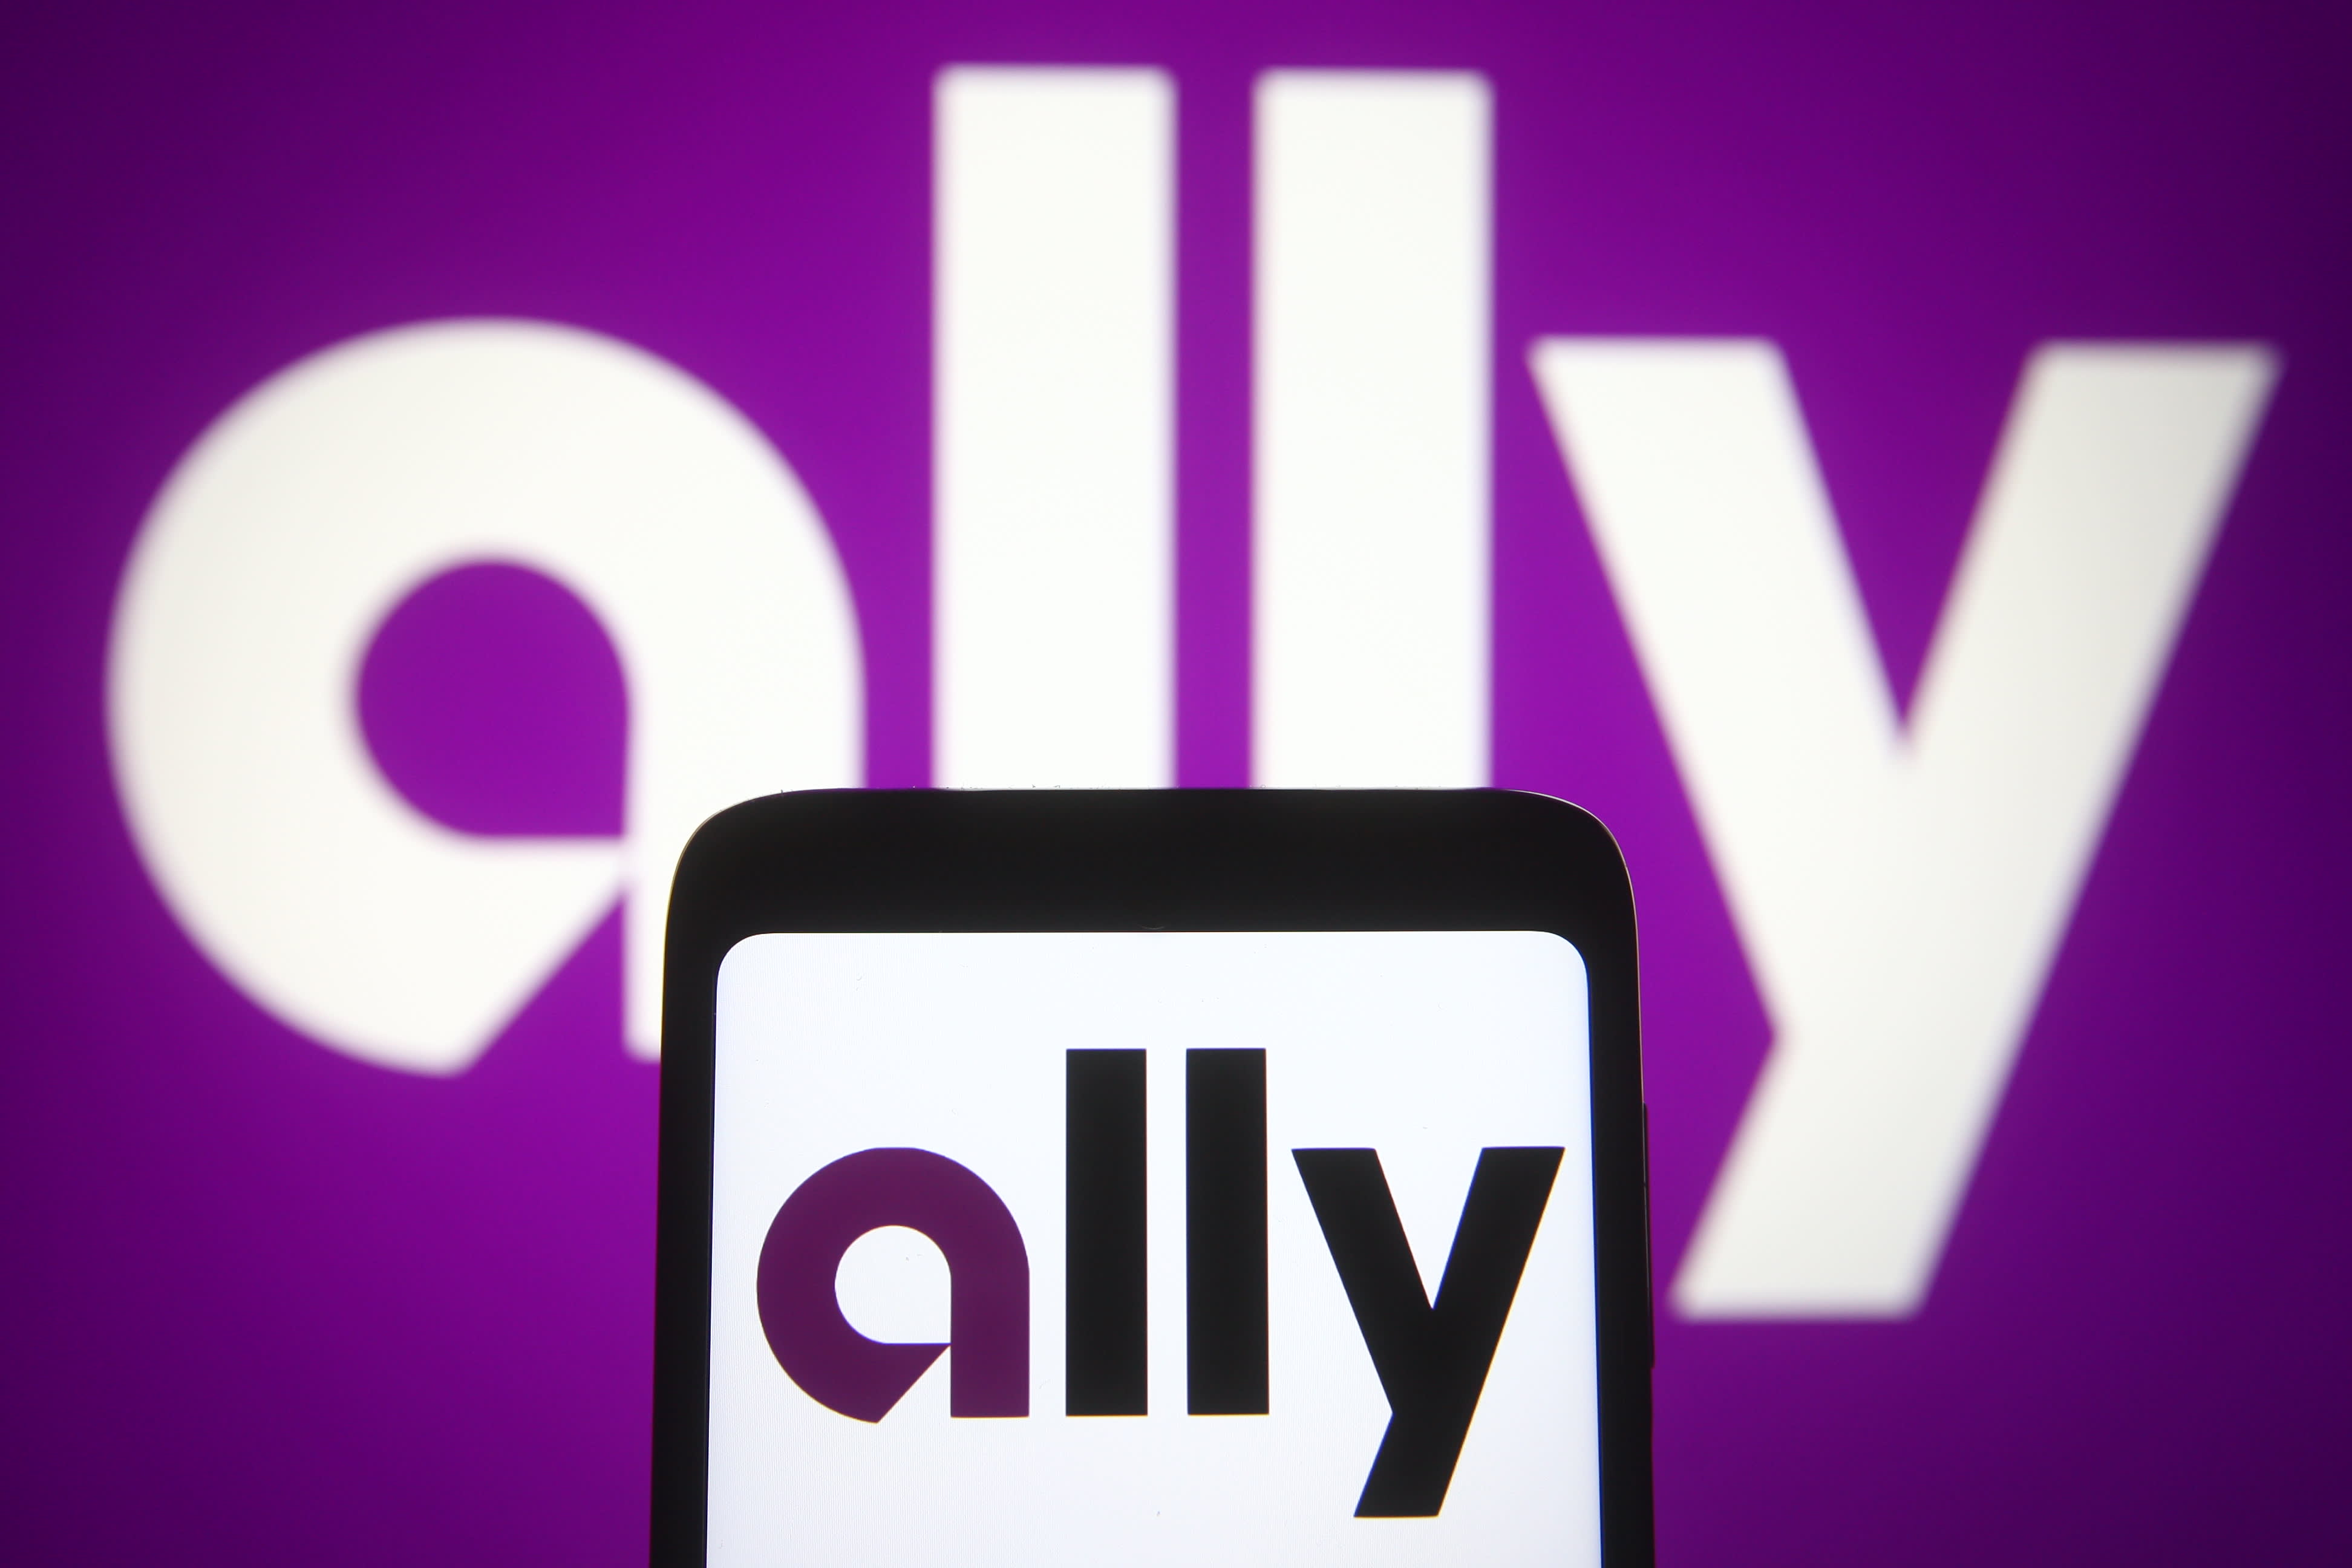 Barclays downgrades Ally Financial, says the bank is more vulnerable in 2023